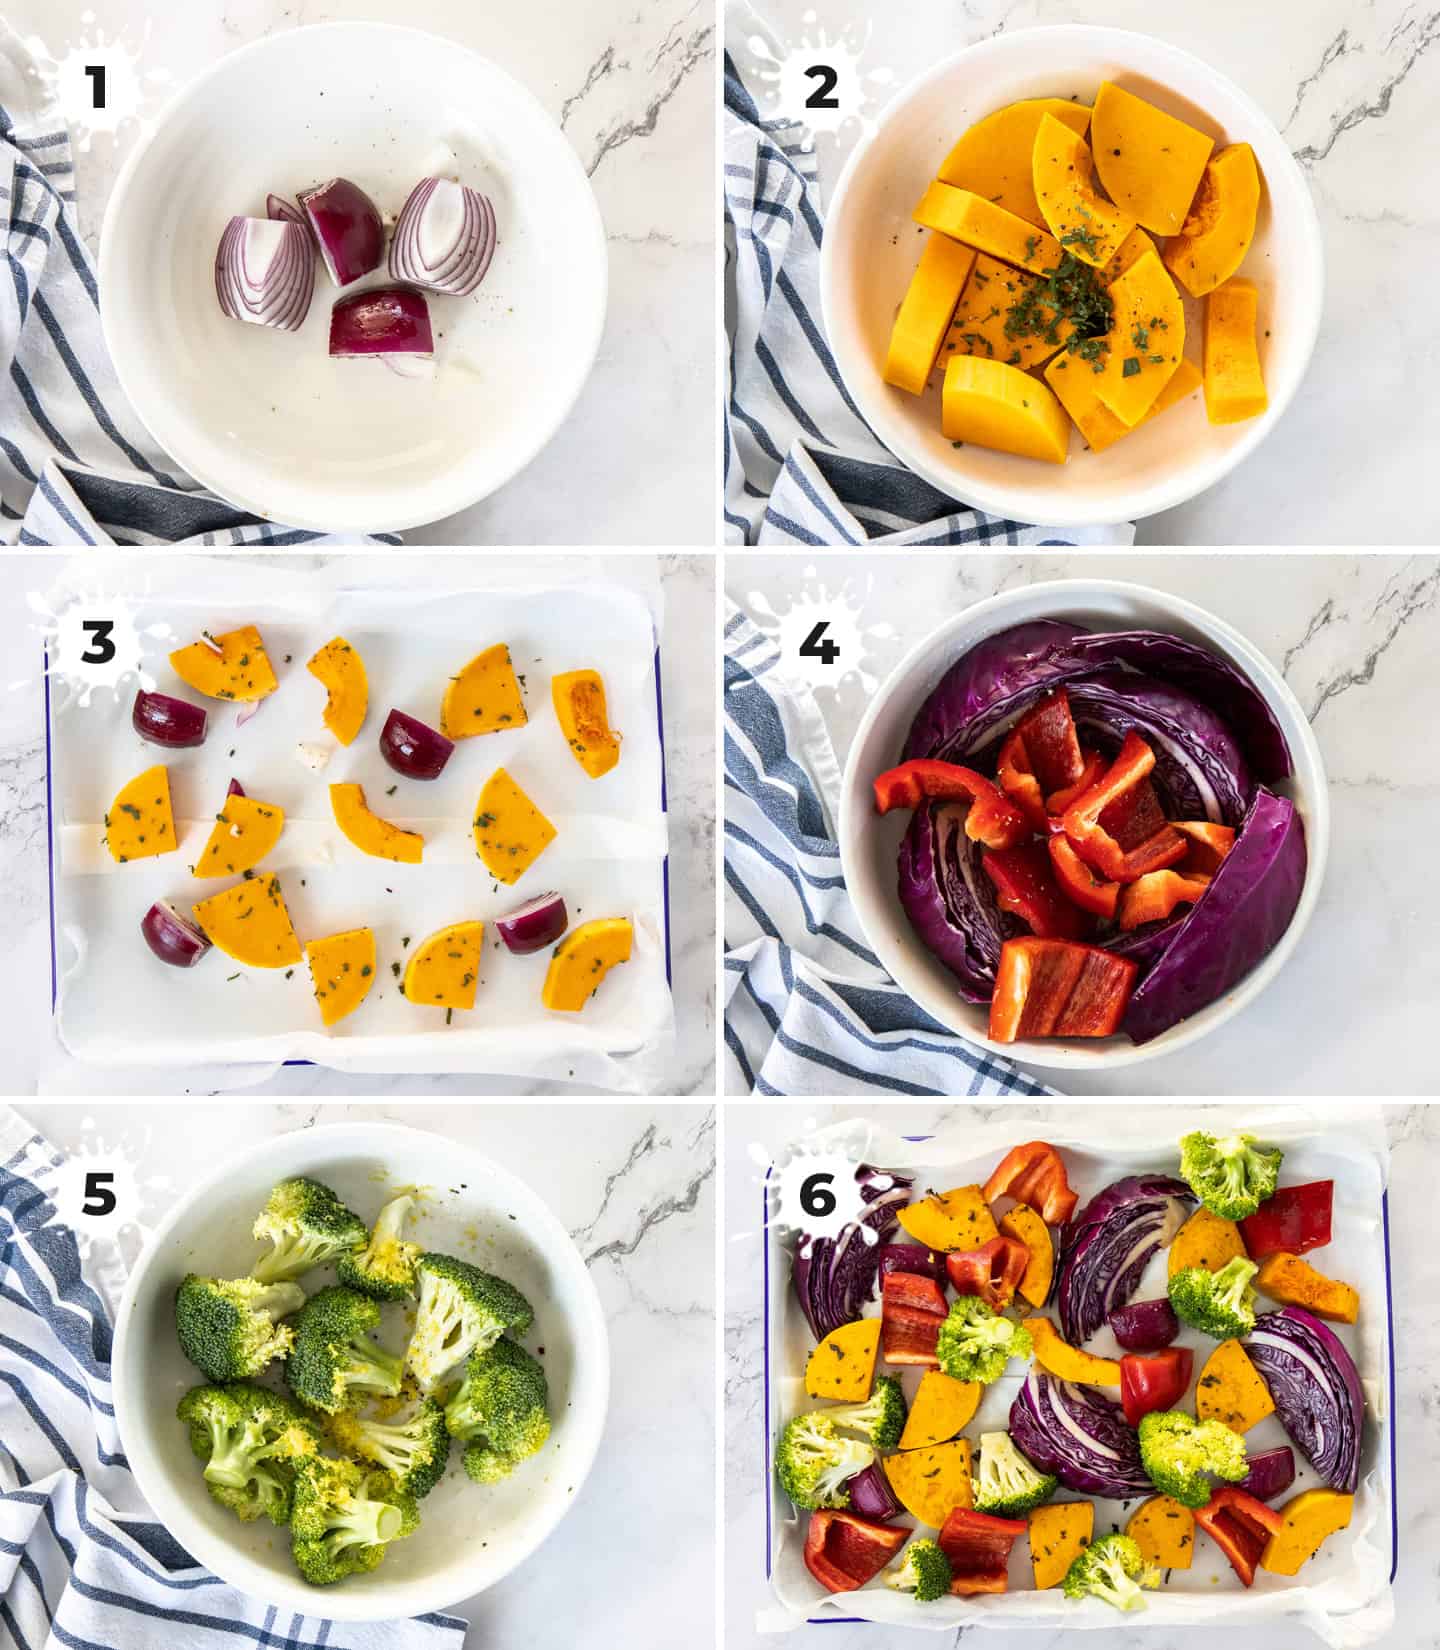 A collage of 6 images showing how to prepare vegetables for roasting.